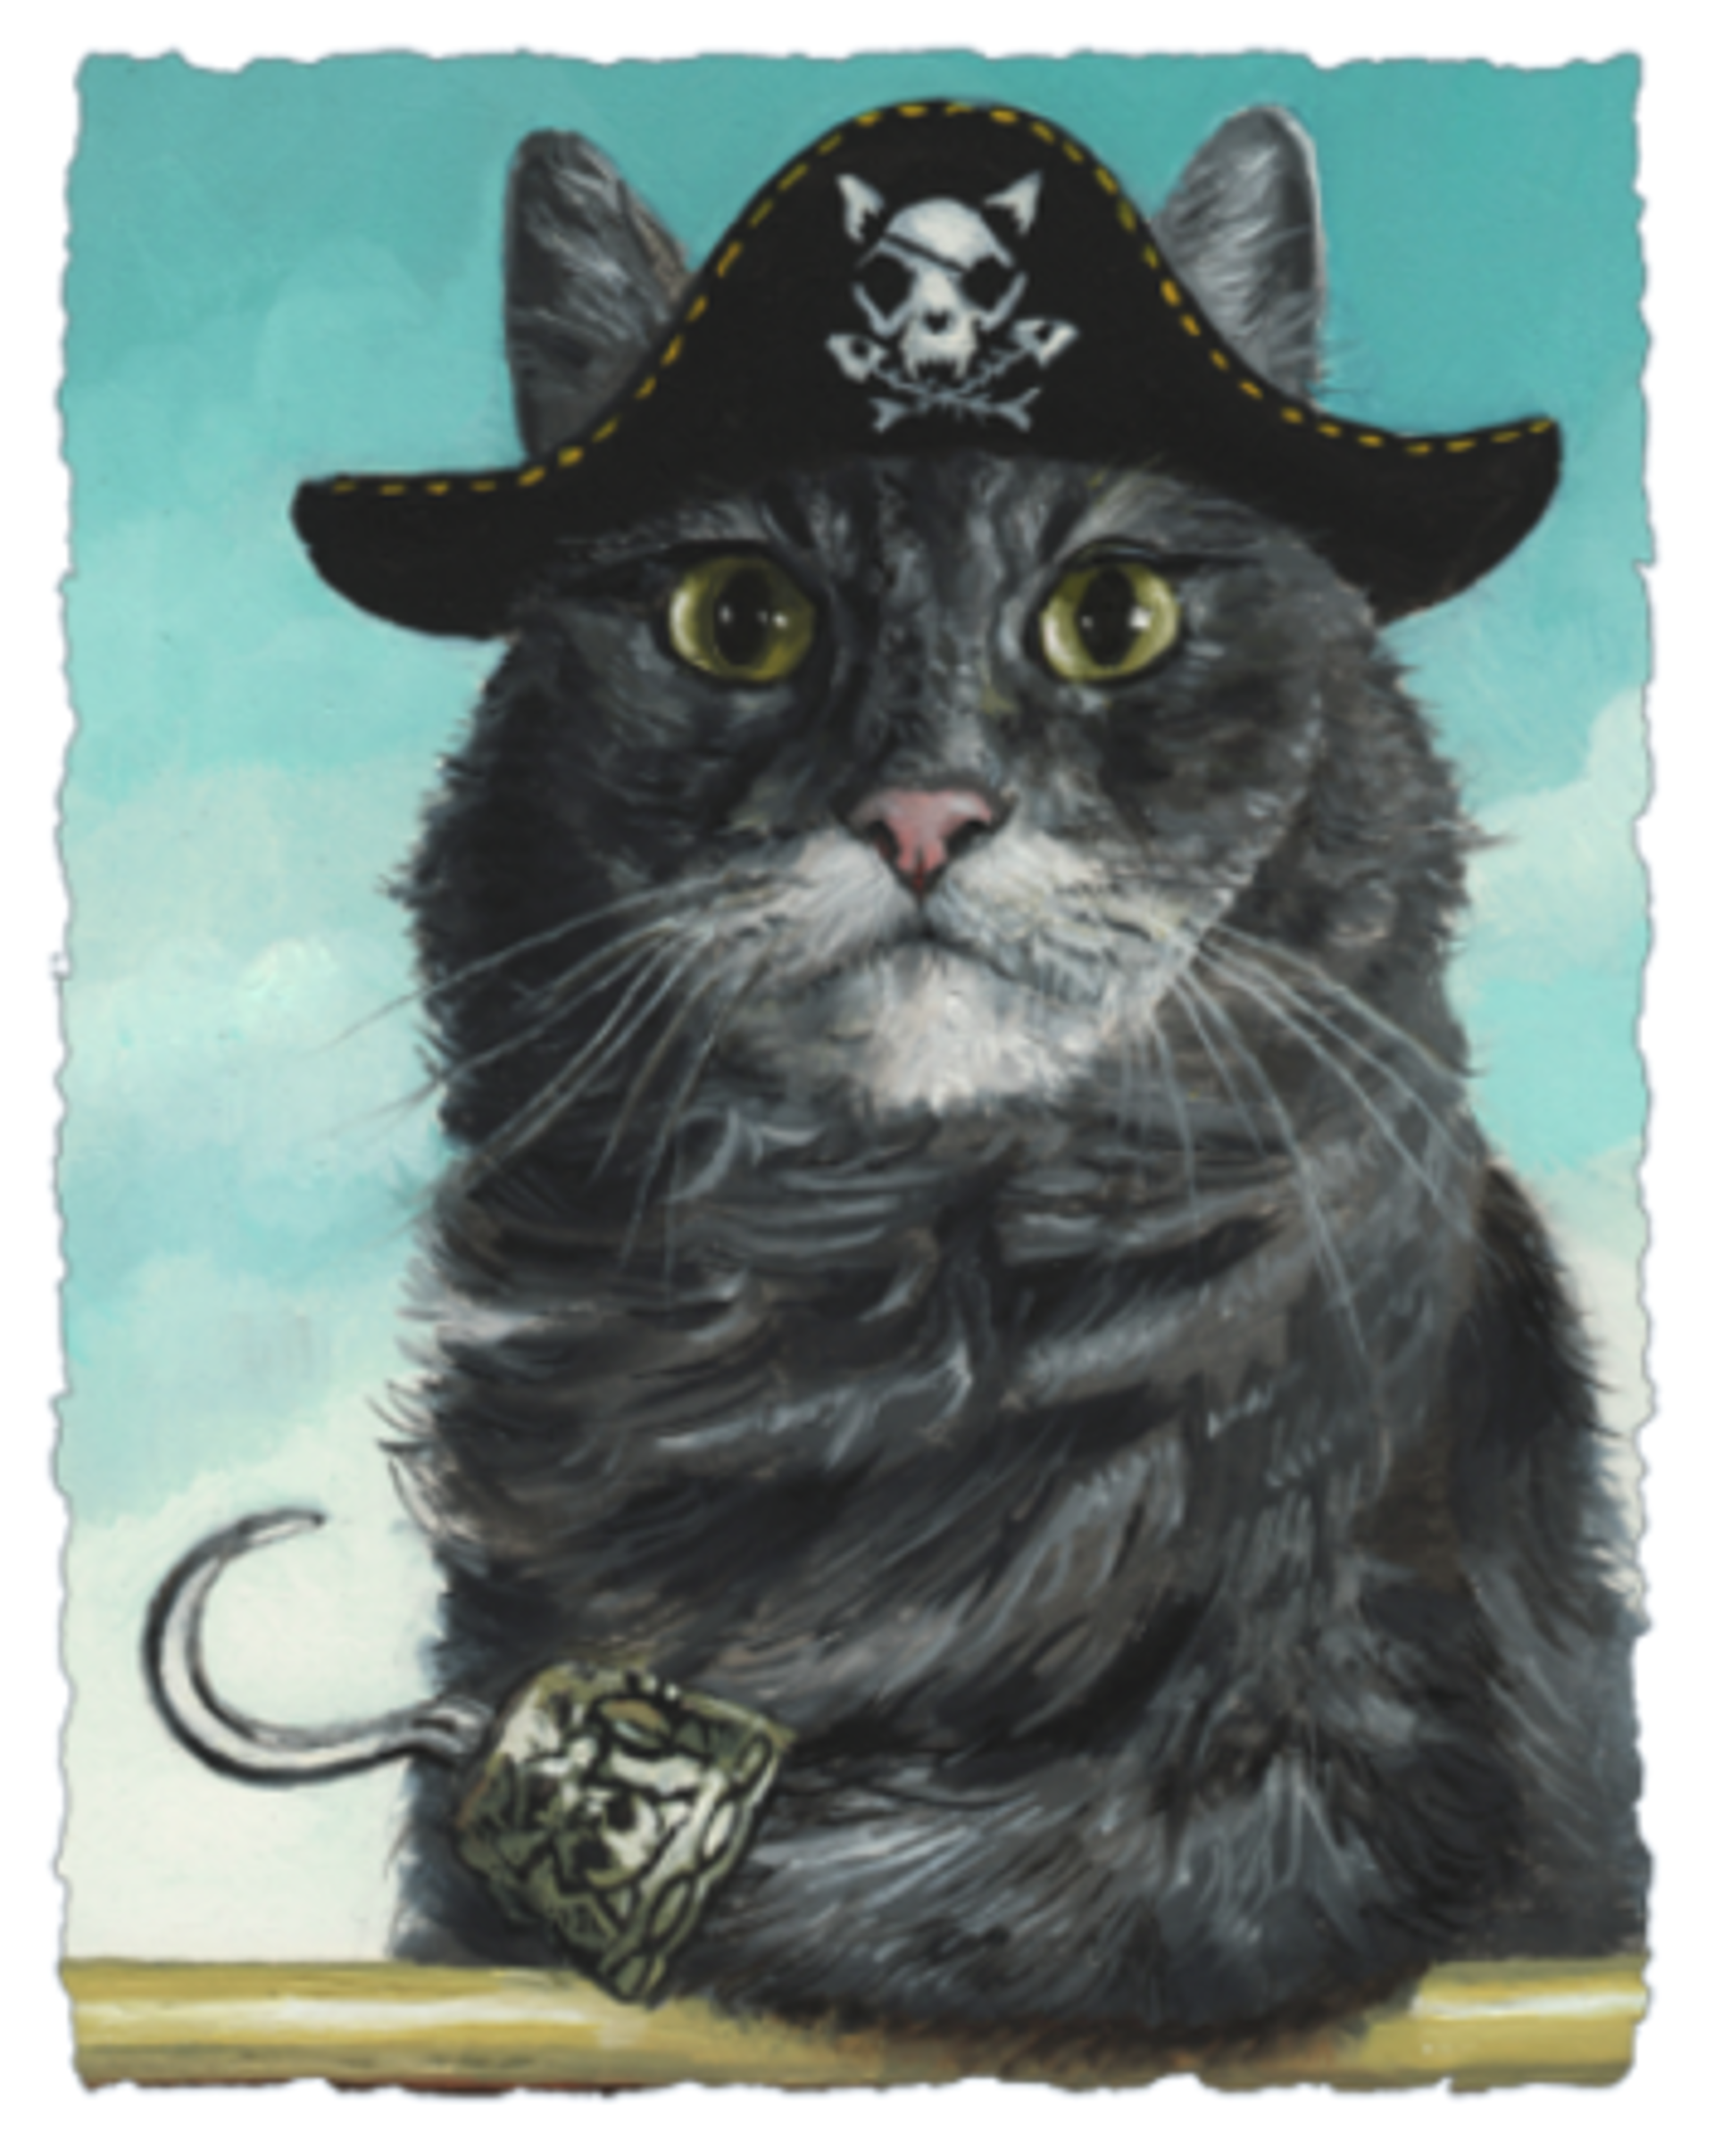 Captain Hooks giclee by Liese Chavez